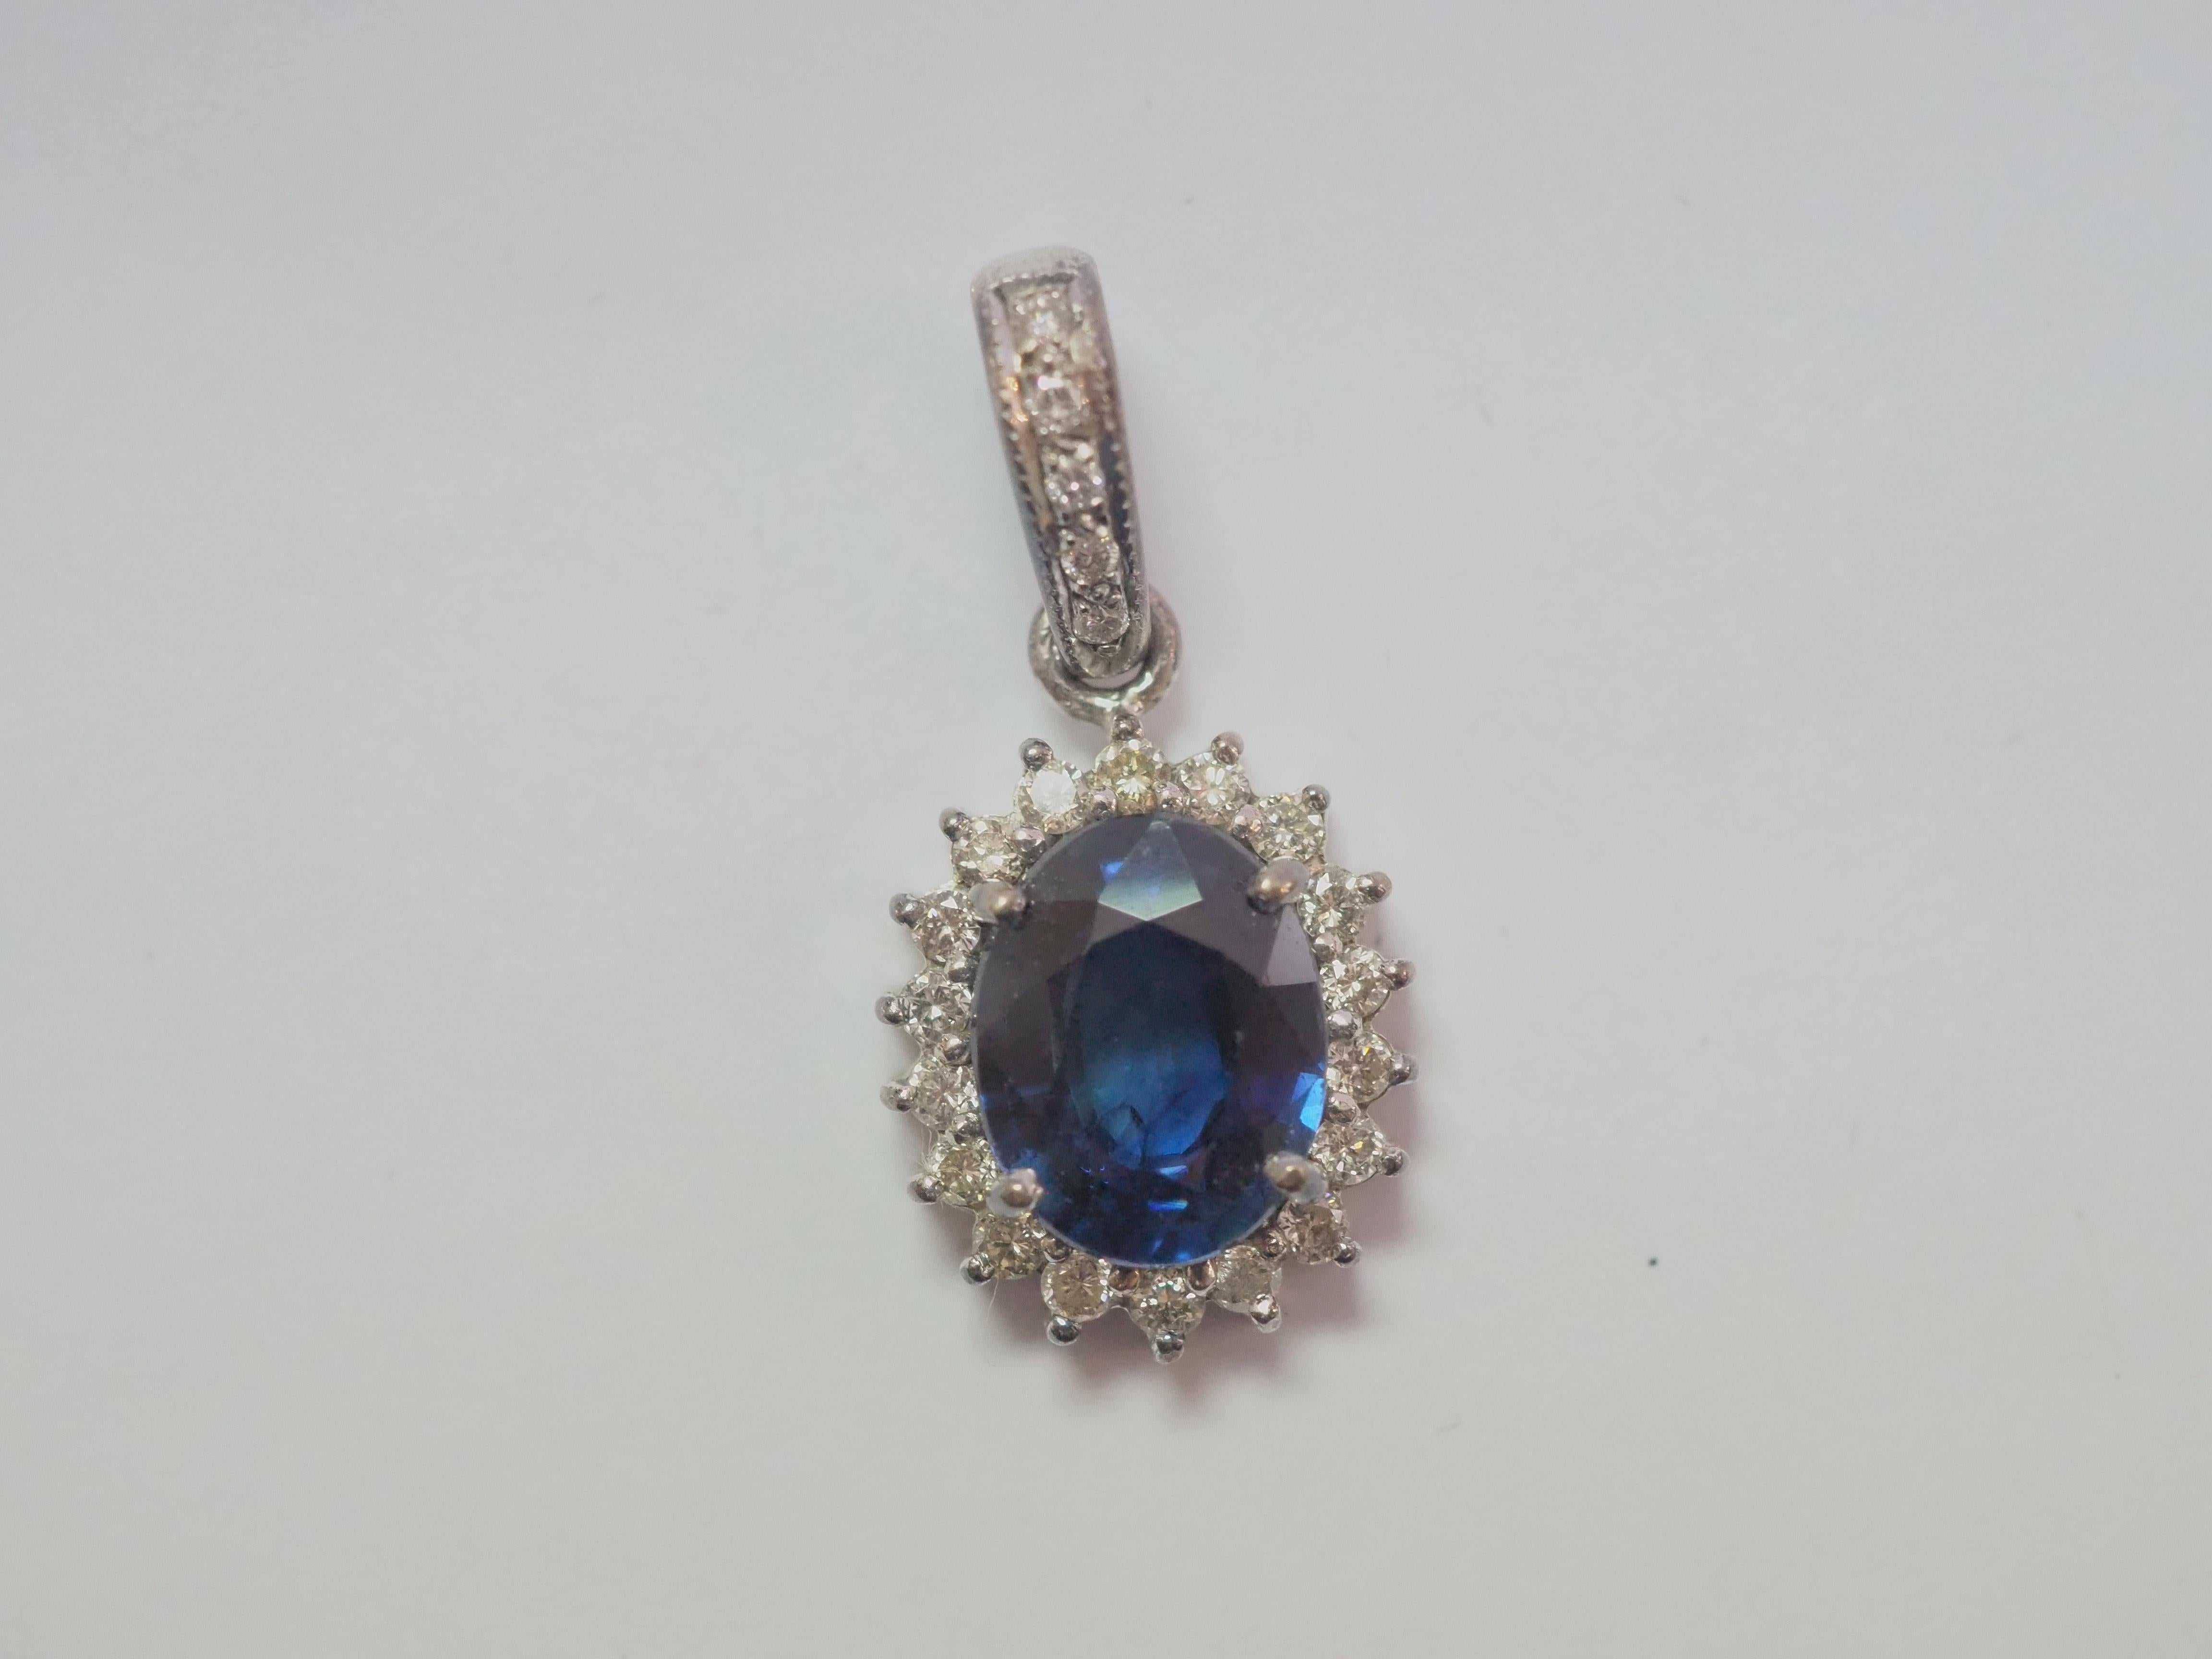 A beautiful and quality cocktail pendant enhancer. This beautiful piece is crafted in our workshop using 18K white gold. The piece is adorned with a gorgeous 3.33 carats oval well- saturated blue sapphire and with 0.42 carats of brilliant diamonds